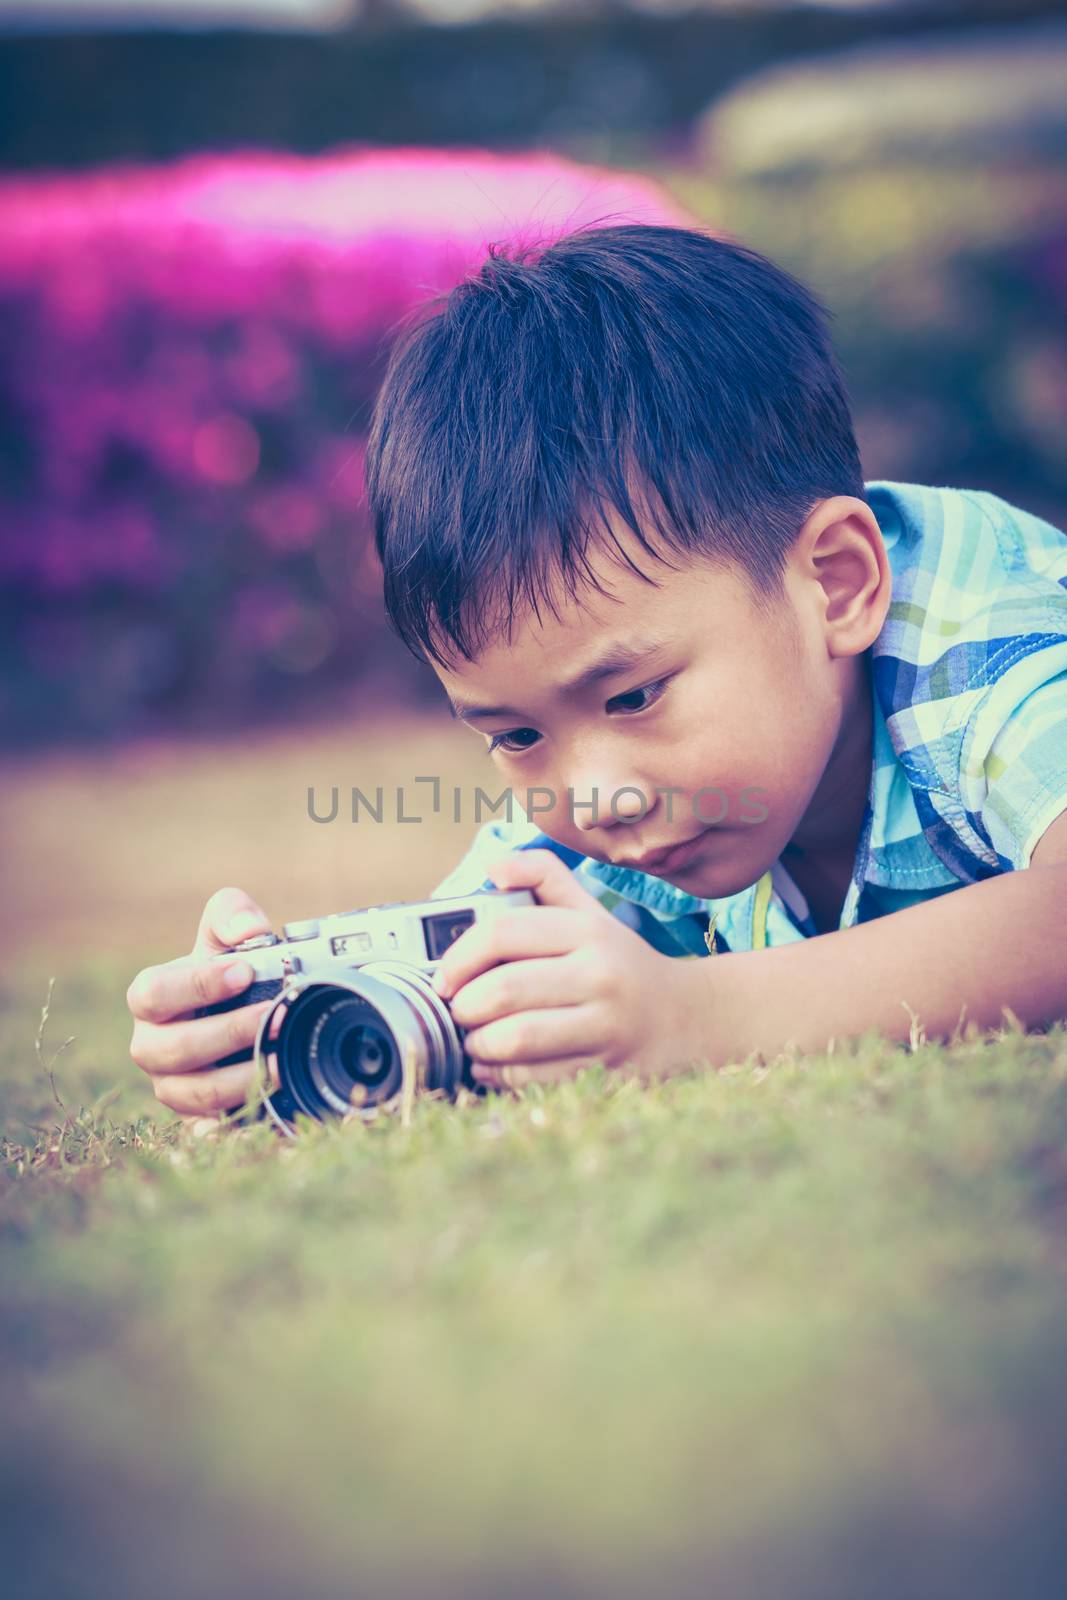 Boy taking photo by camera, exploring nature at park. Adorable c by kdshutterman